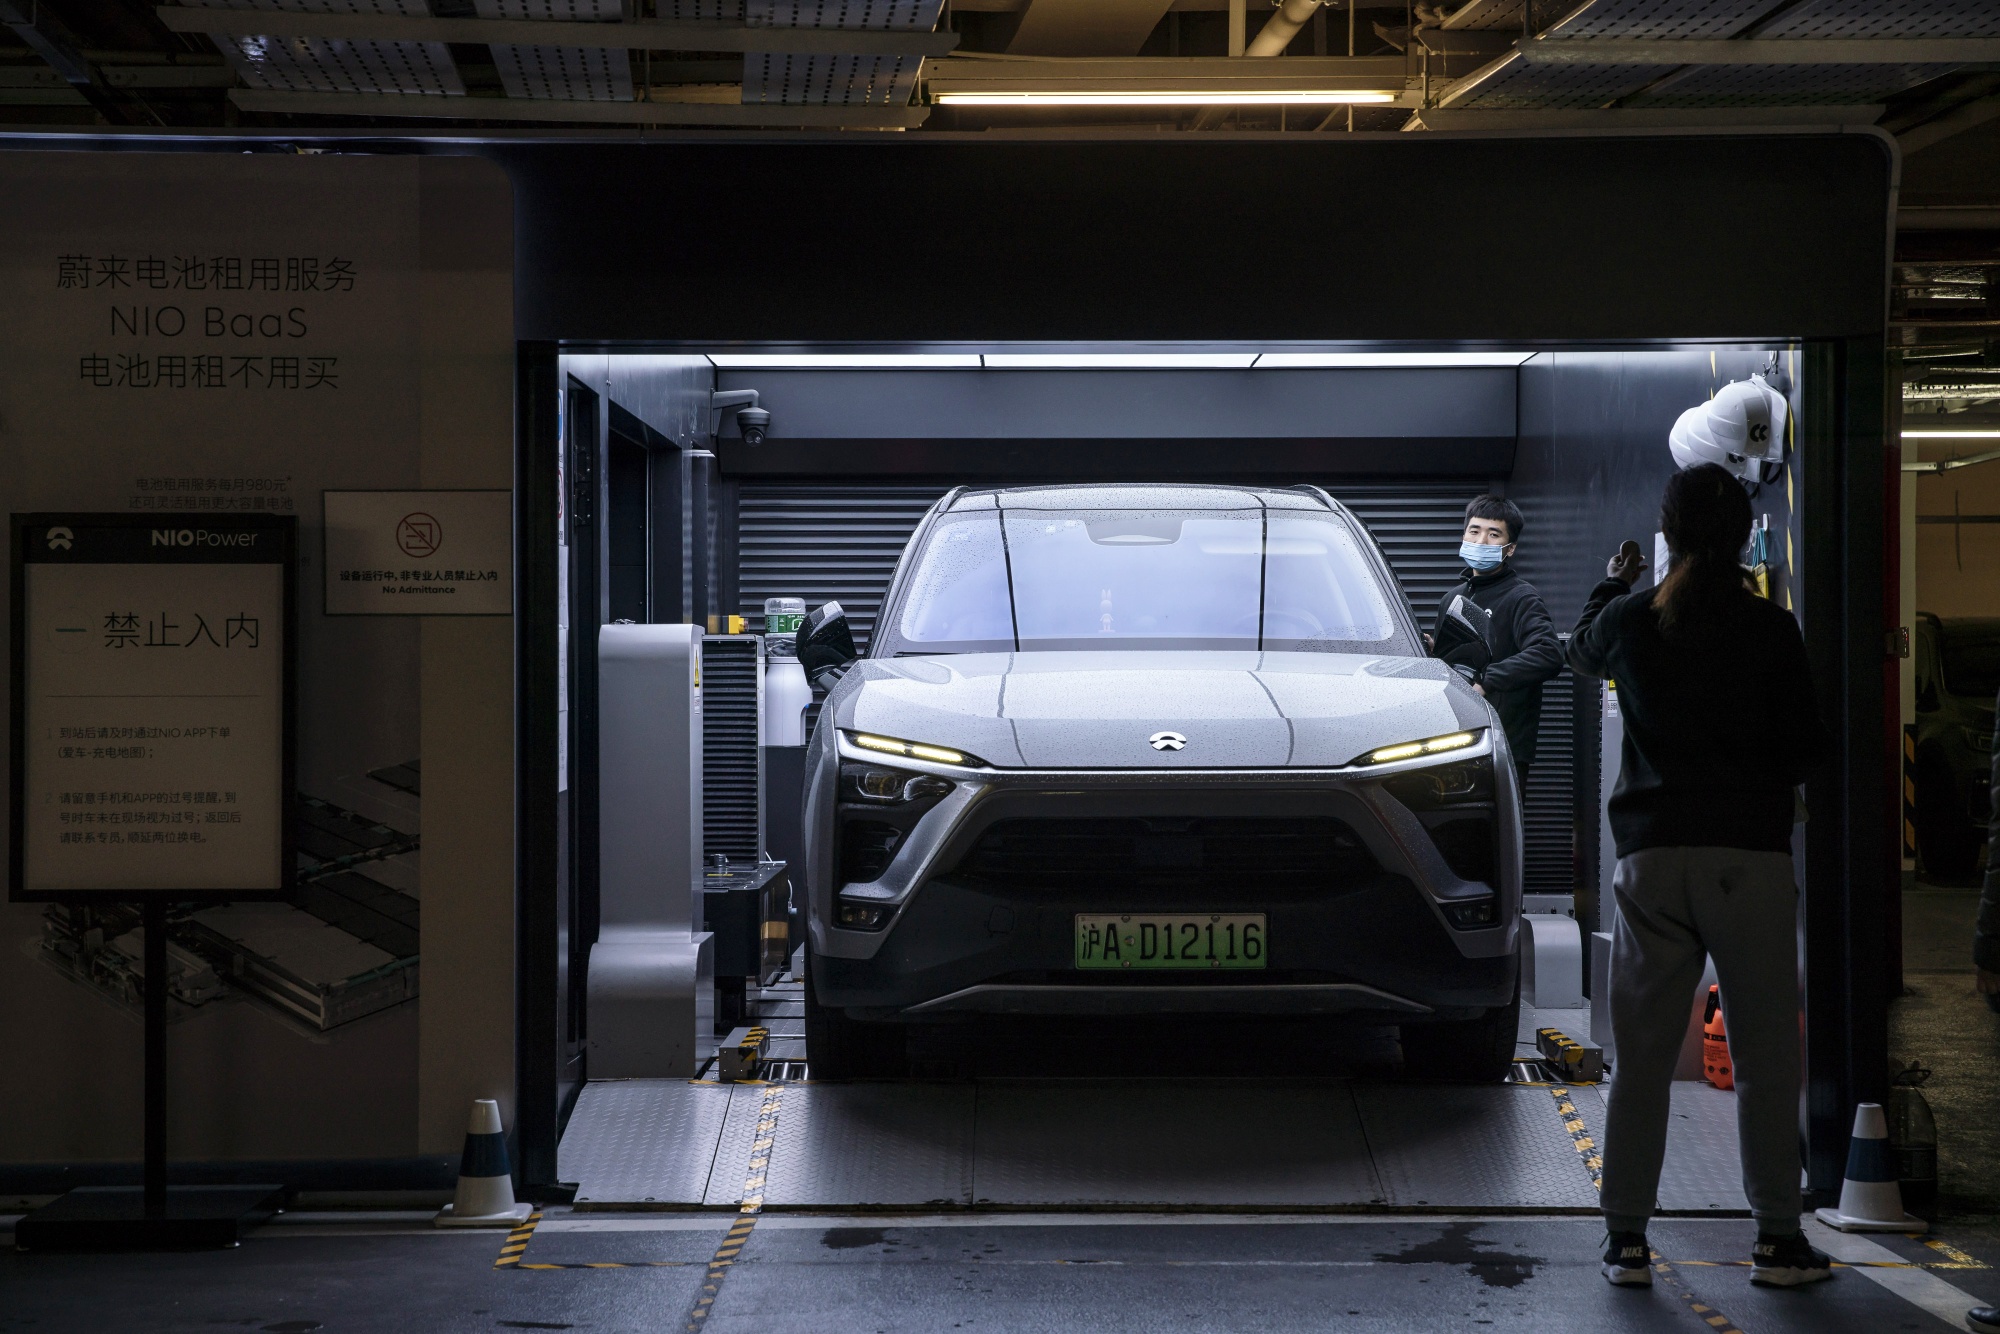 A Nio Inc. ES6 electric vehicle at a battery swap station in Shanghai.